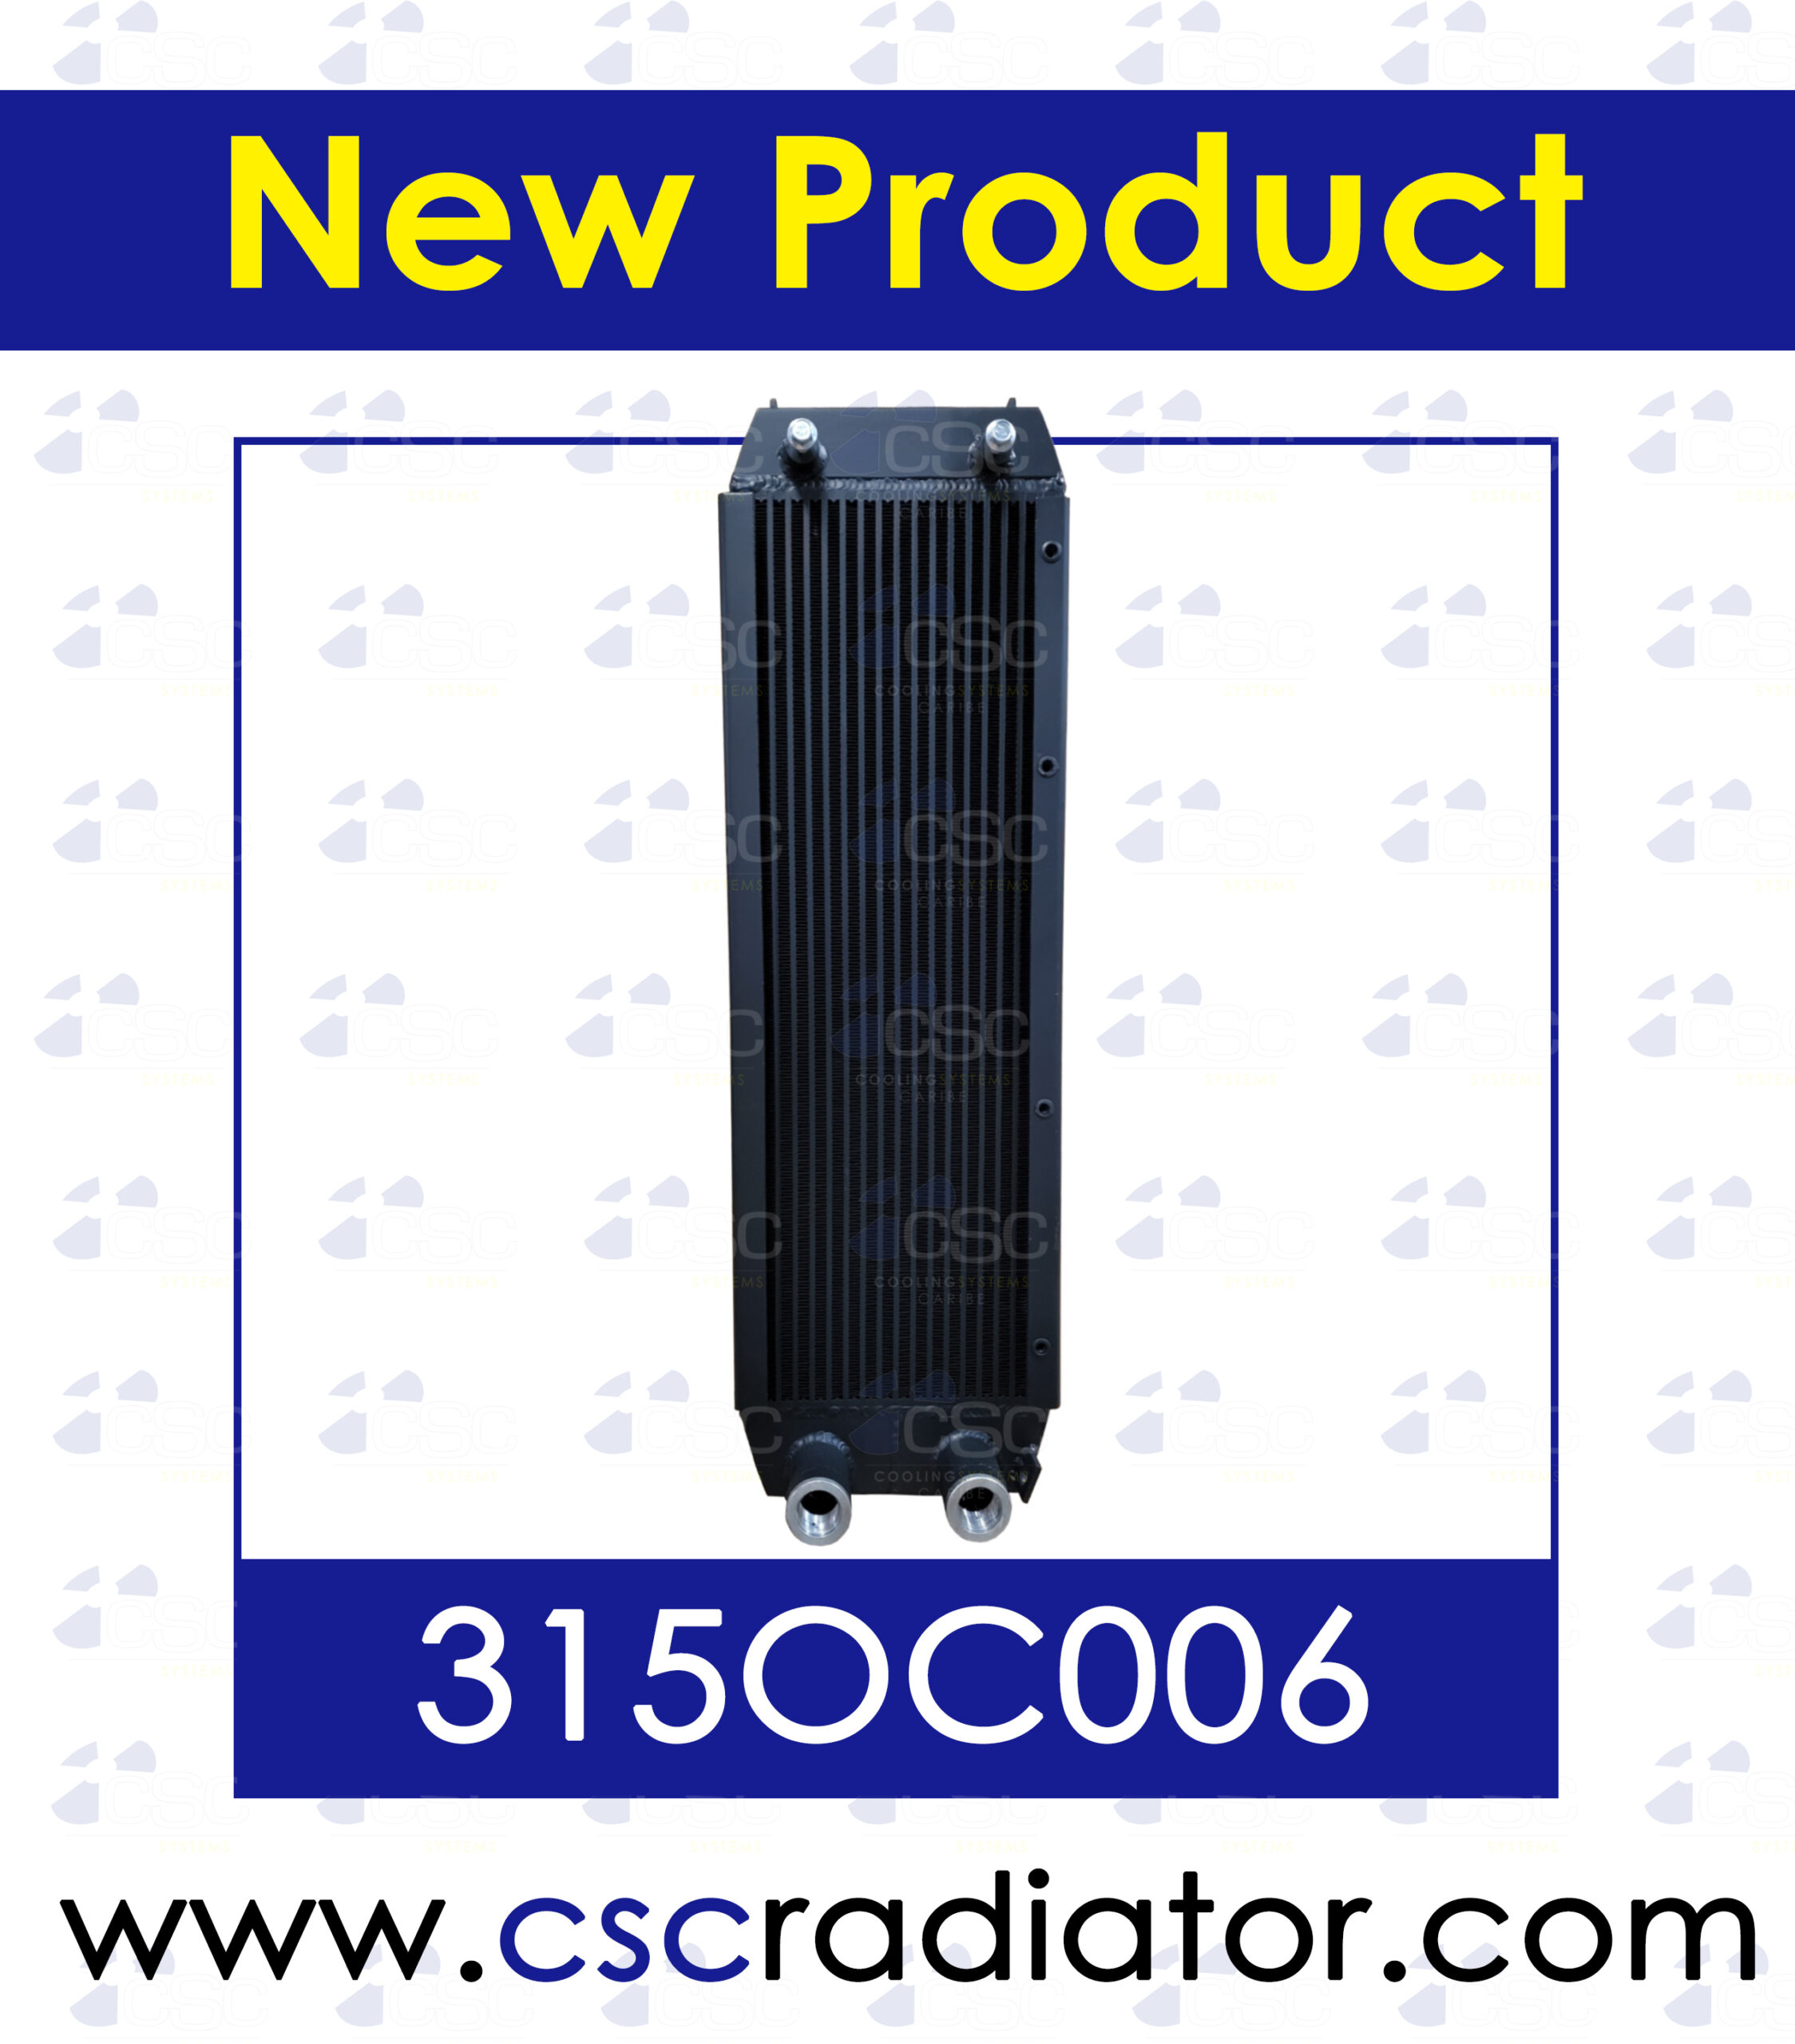 New Product Release: 315OC006